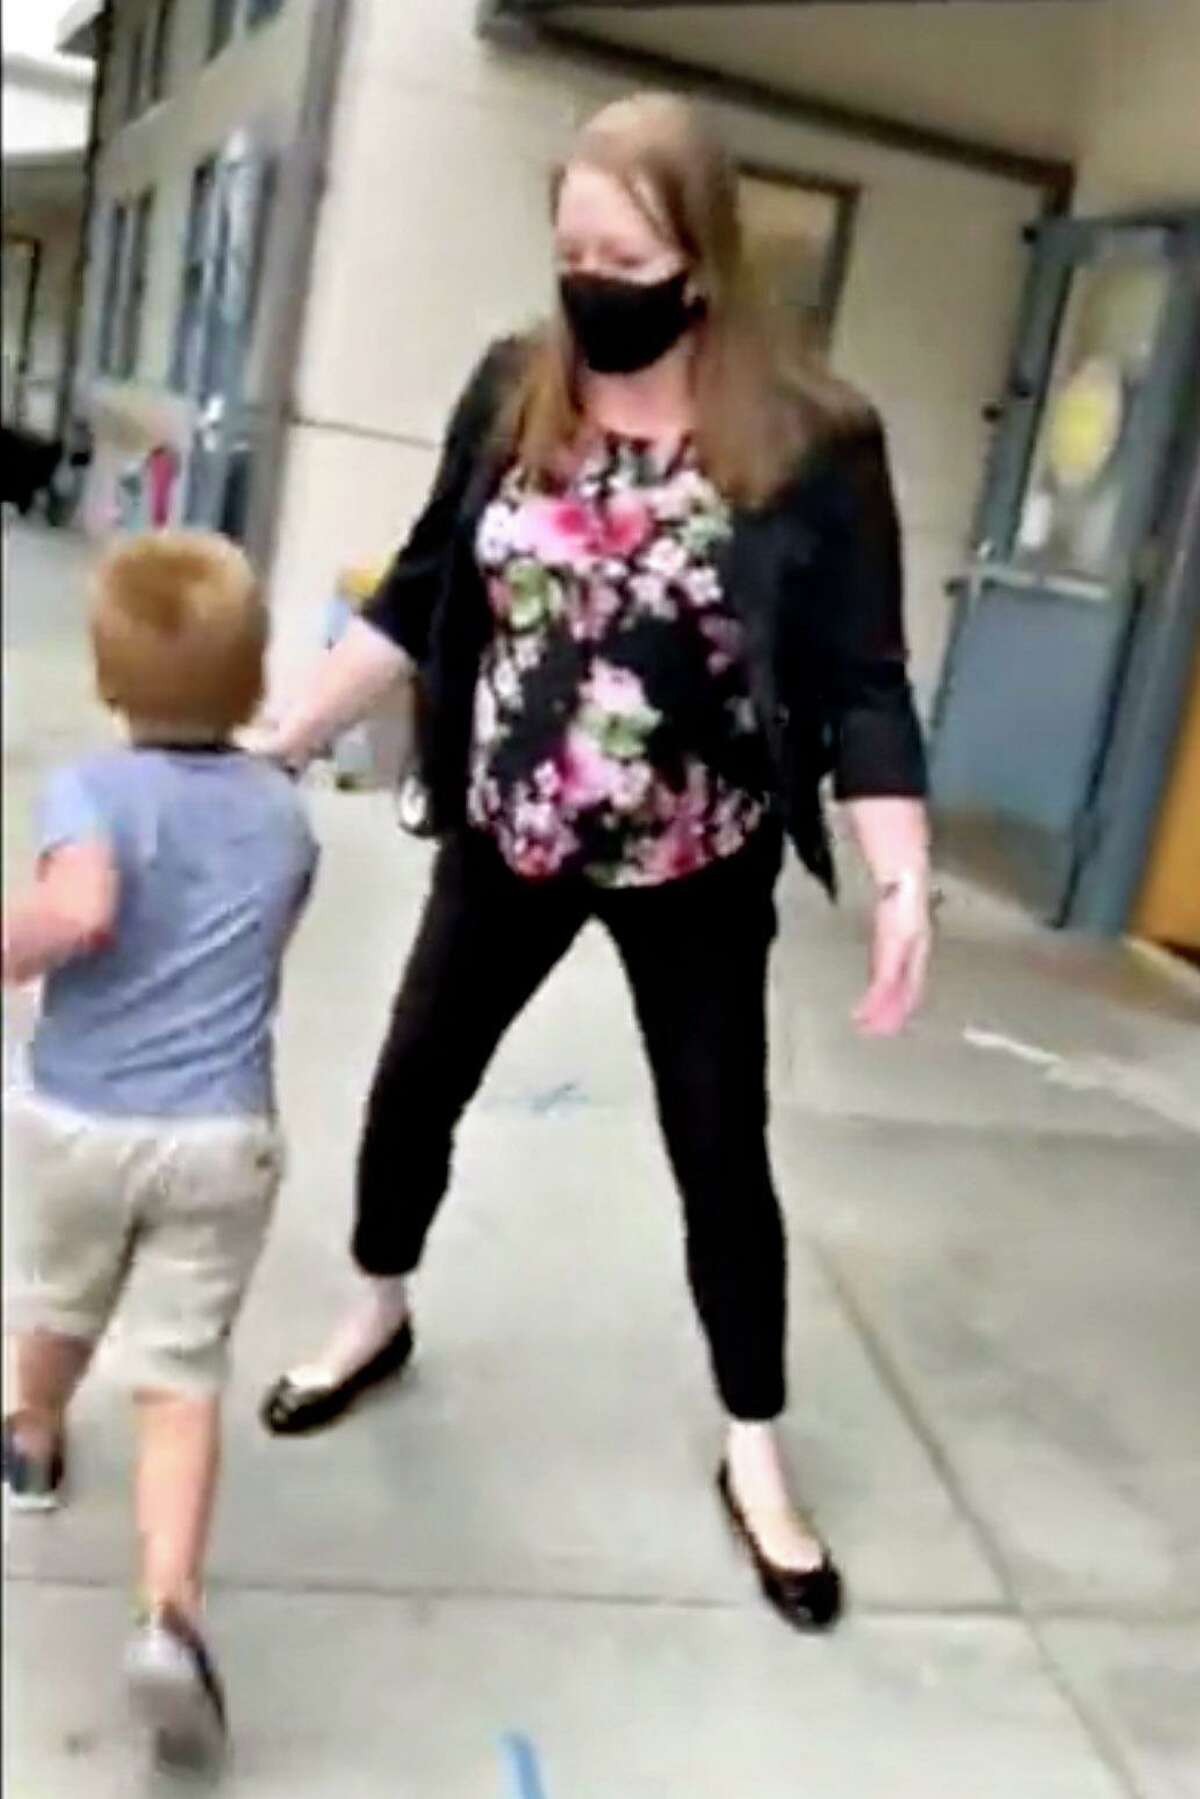 A school official at Theuerkauf Elementary in Mountain View prevents a 4-year-old transitional kindergarten student who refused to wear a mask from attending class. The incident, which included the principal calling a police officer to the scene, was recorded by the student’s father. Video image courtesy of the father, who identified himself only as Shawn for safety reasons.